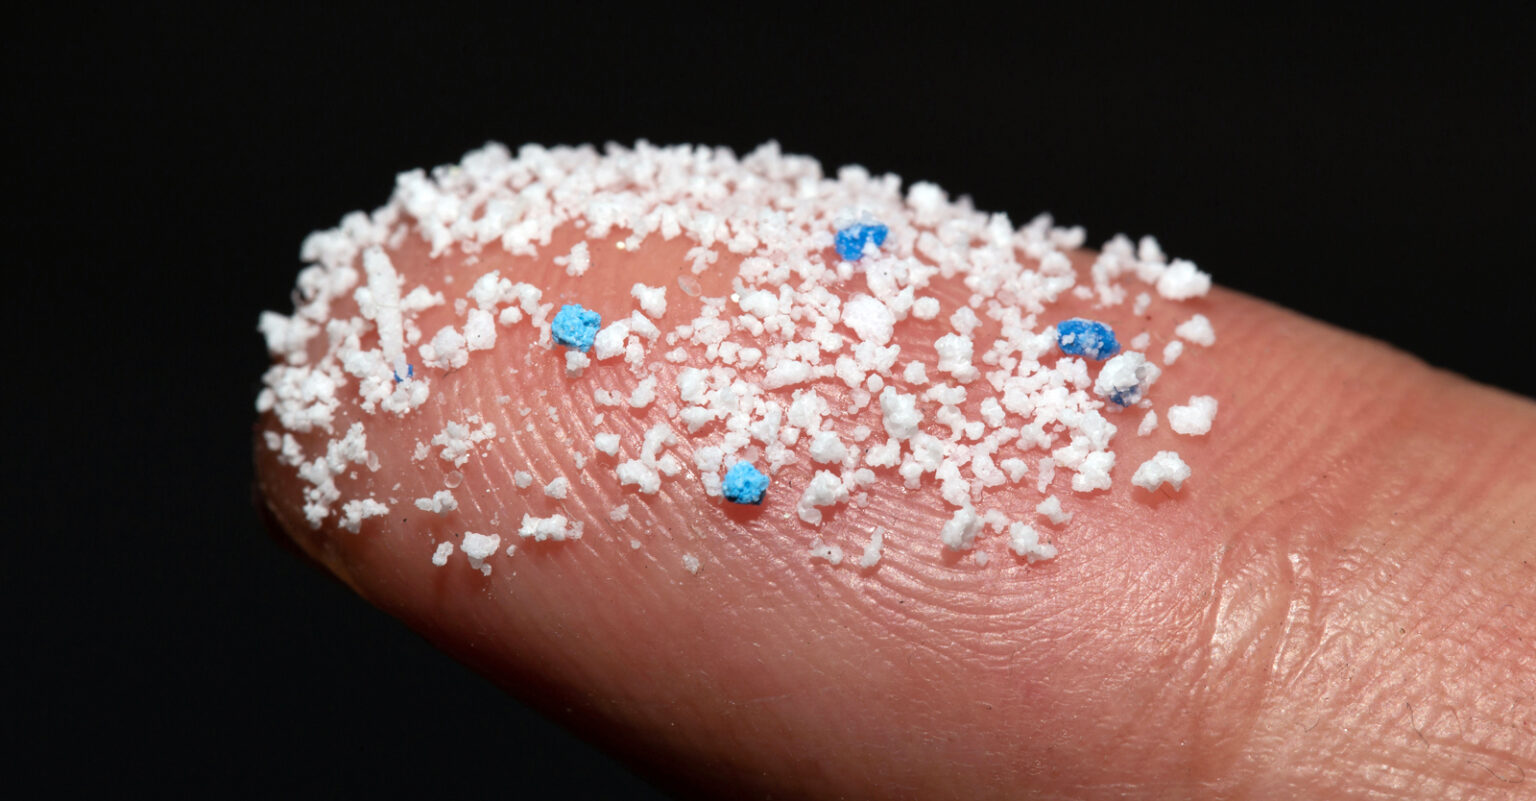 Breakthrough Study Finds Microplastics in Human Blood